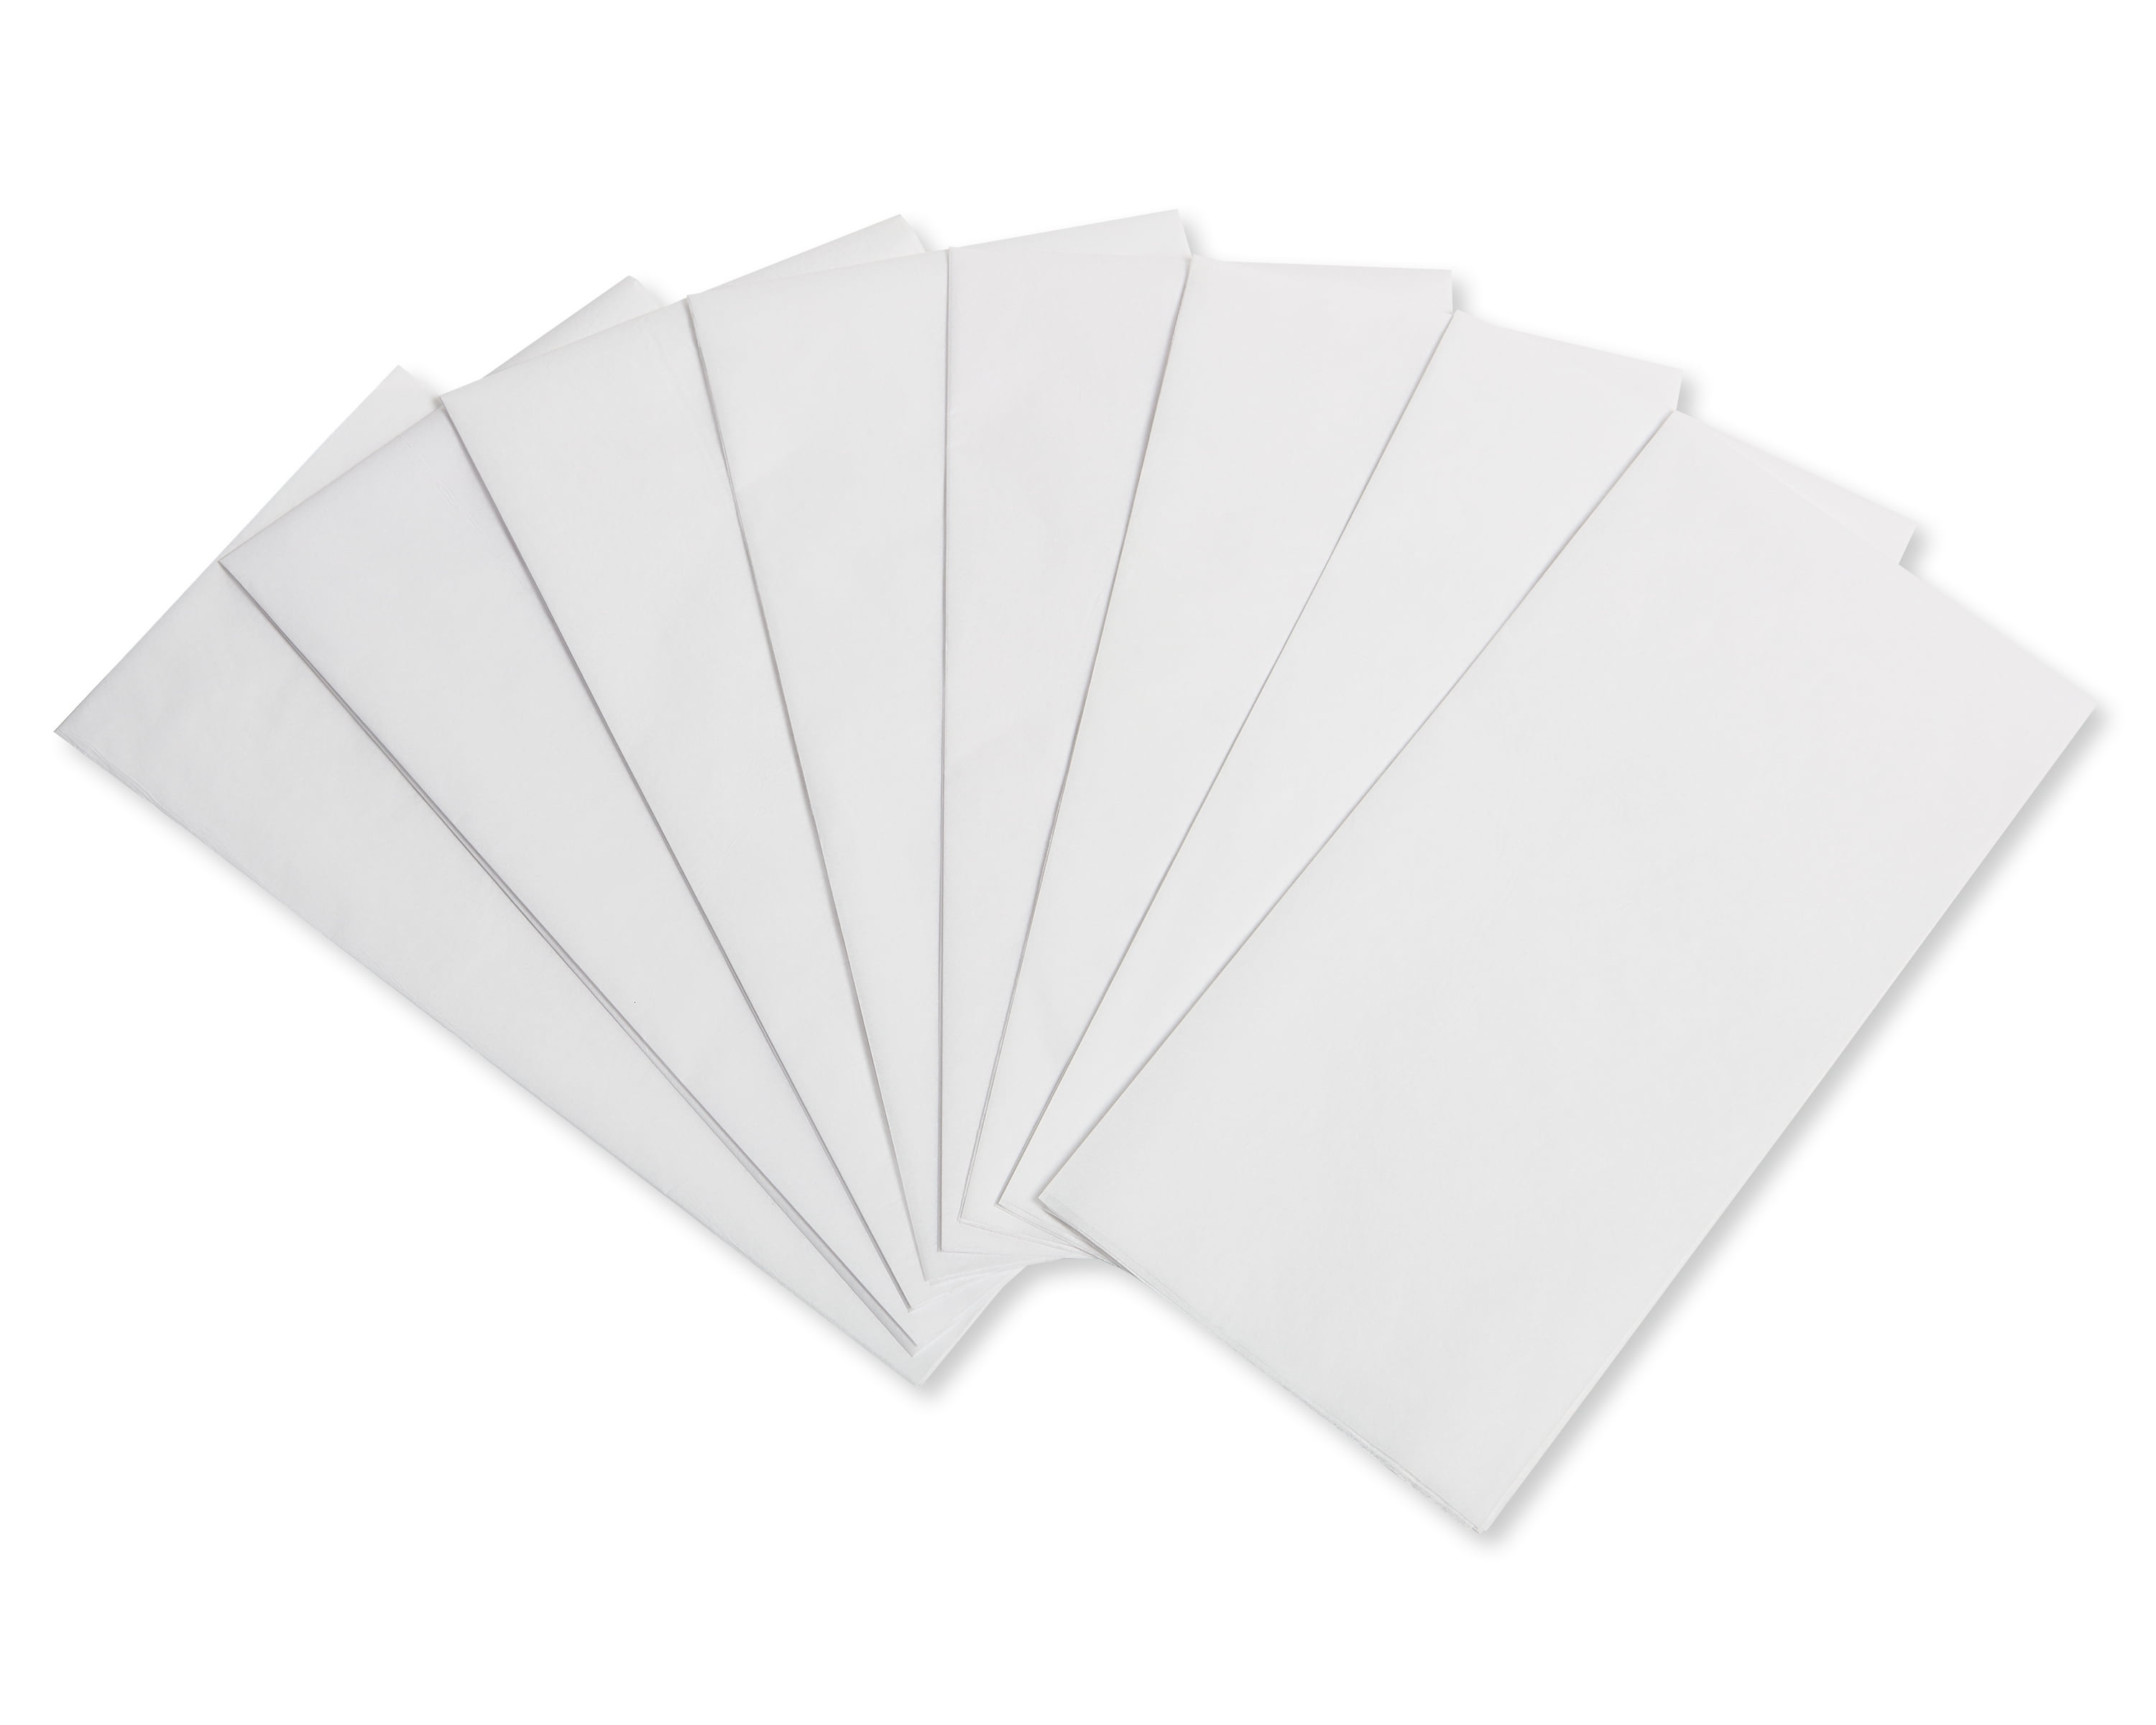 Fosters Acid-Free White Tissue Paper 15 x 20, Pack of 100 Sheets